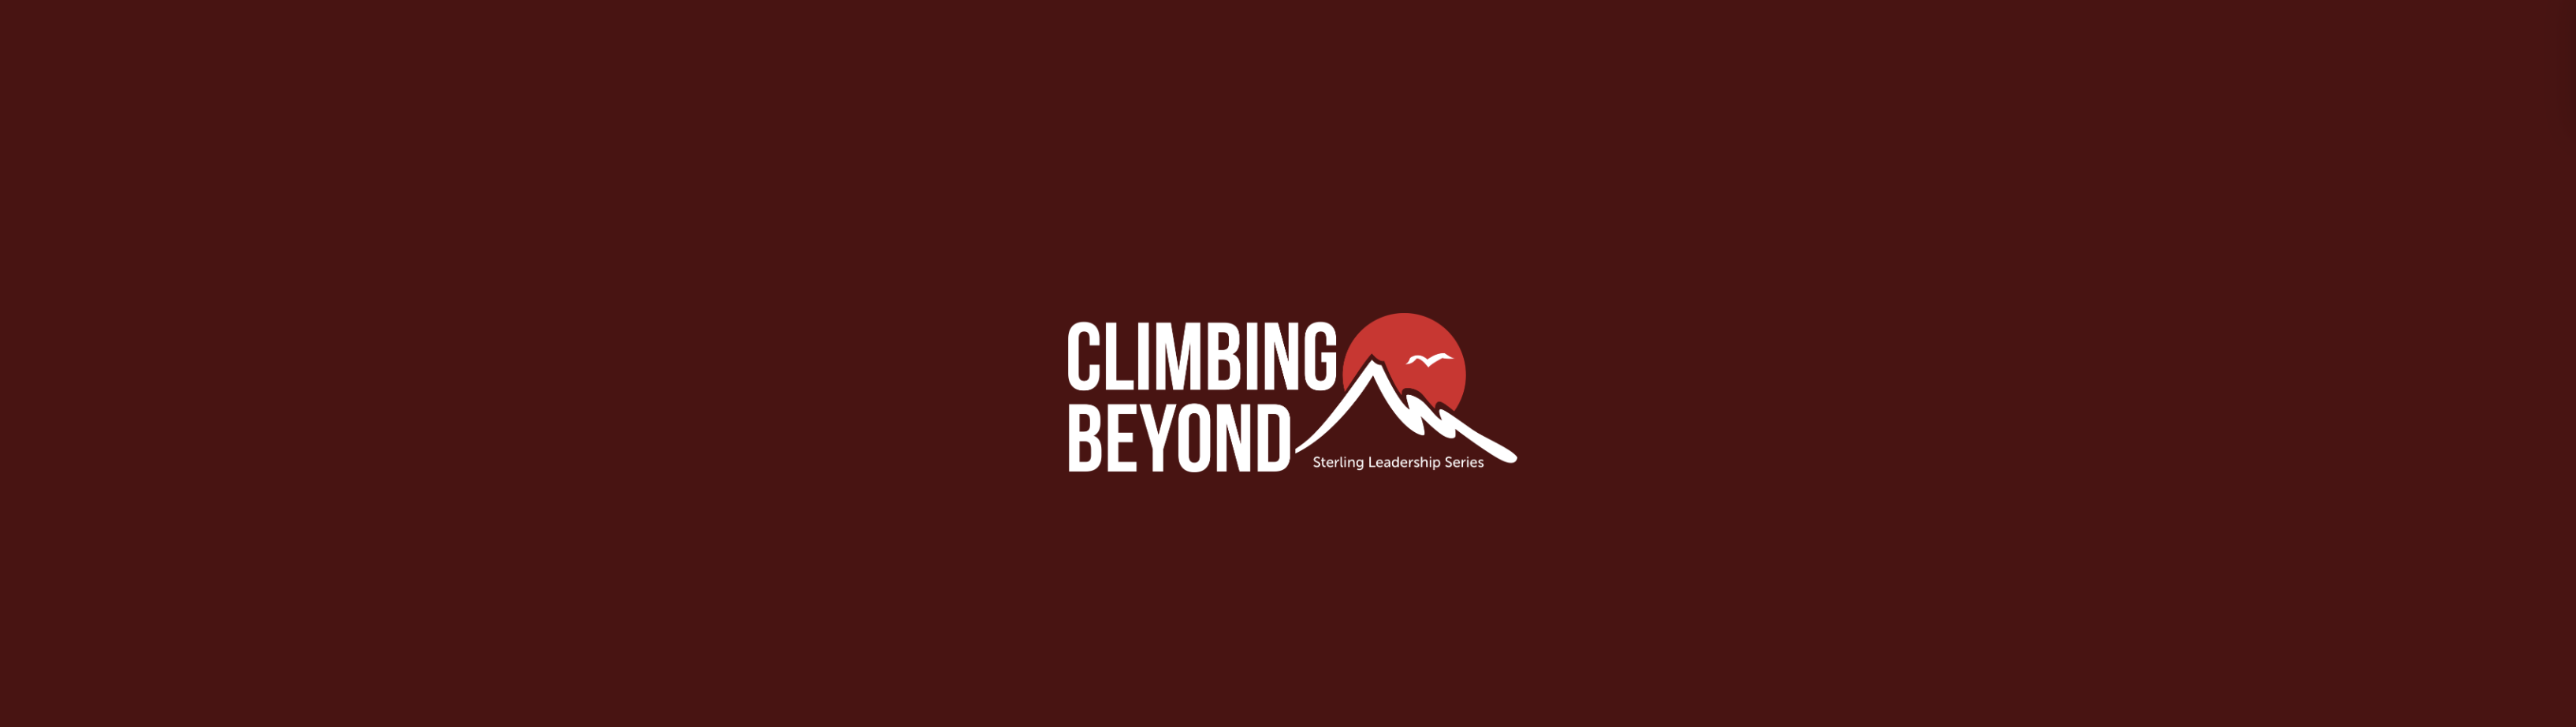 Empathy in business: Climb Beyond